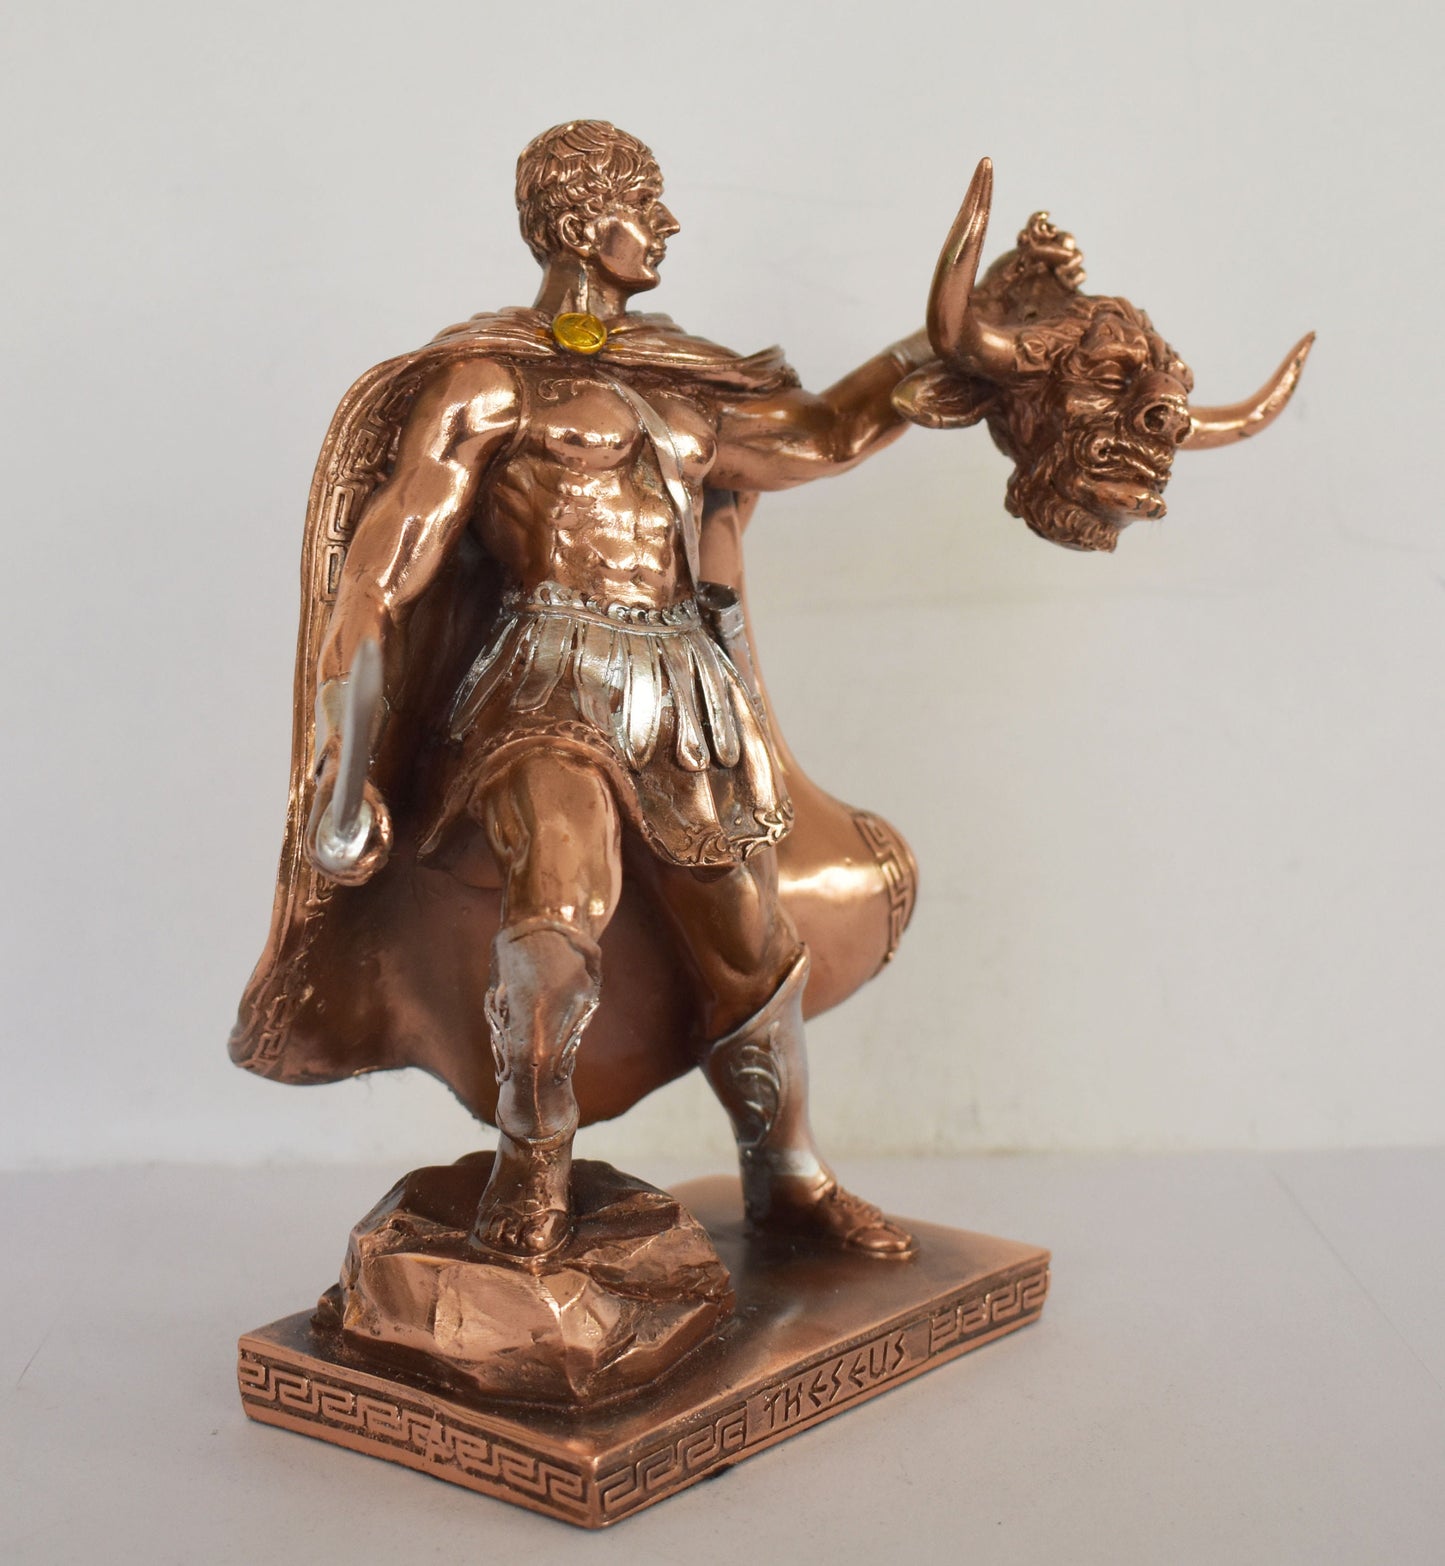 Theseus - Mythical King and Founder-Hero of Athens - Slaying of the Minotaur - Half Man and Half Bull - Copper Plated Alabaster